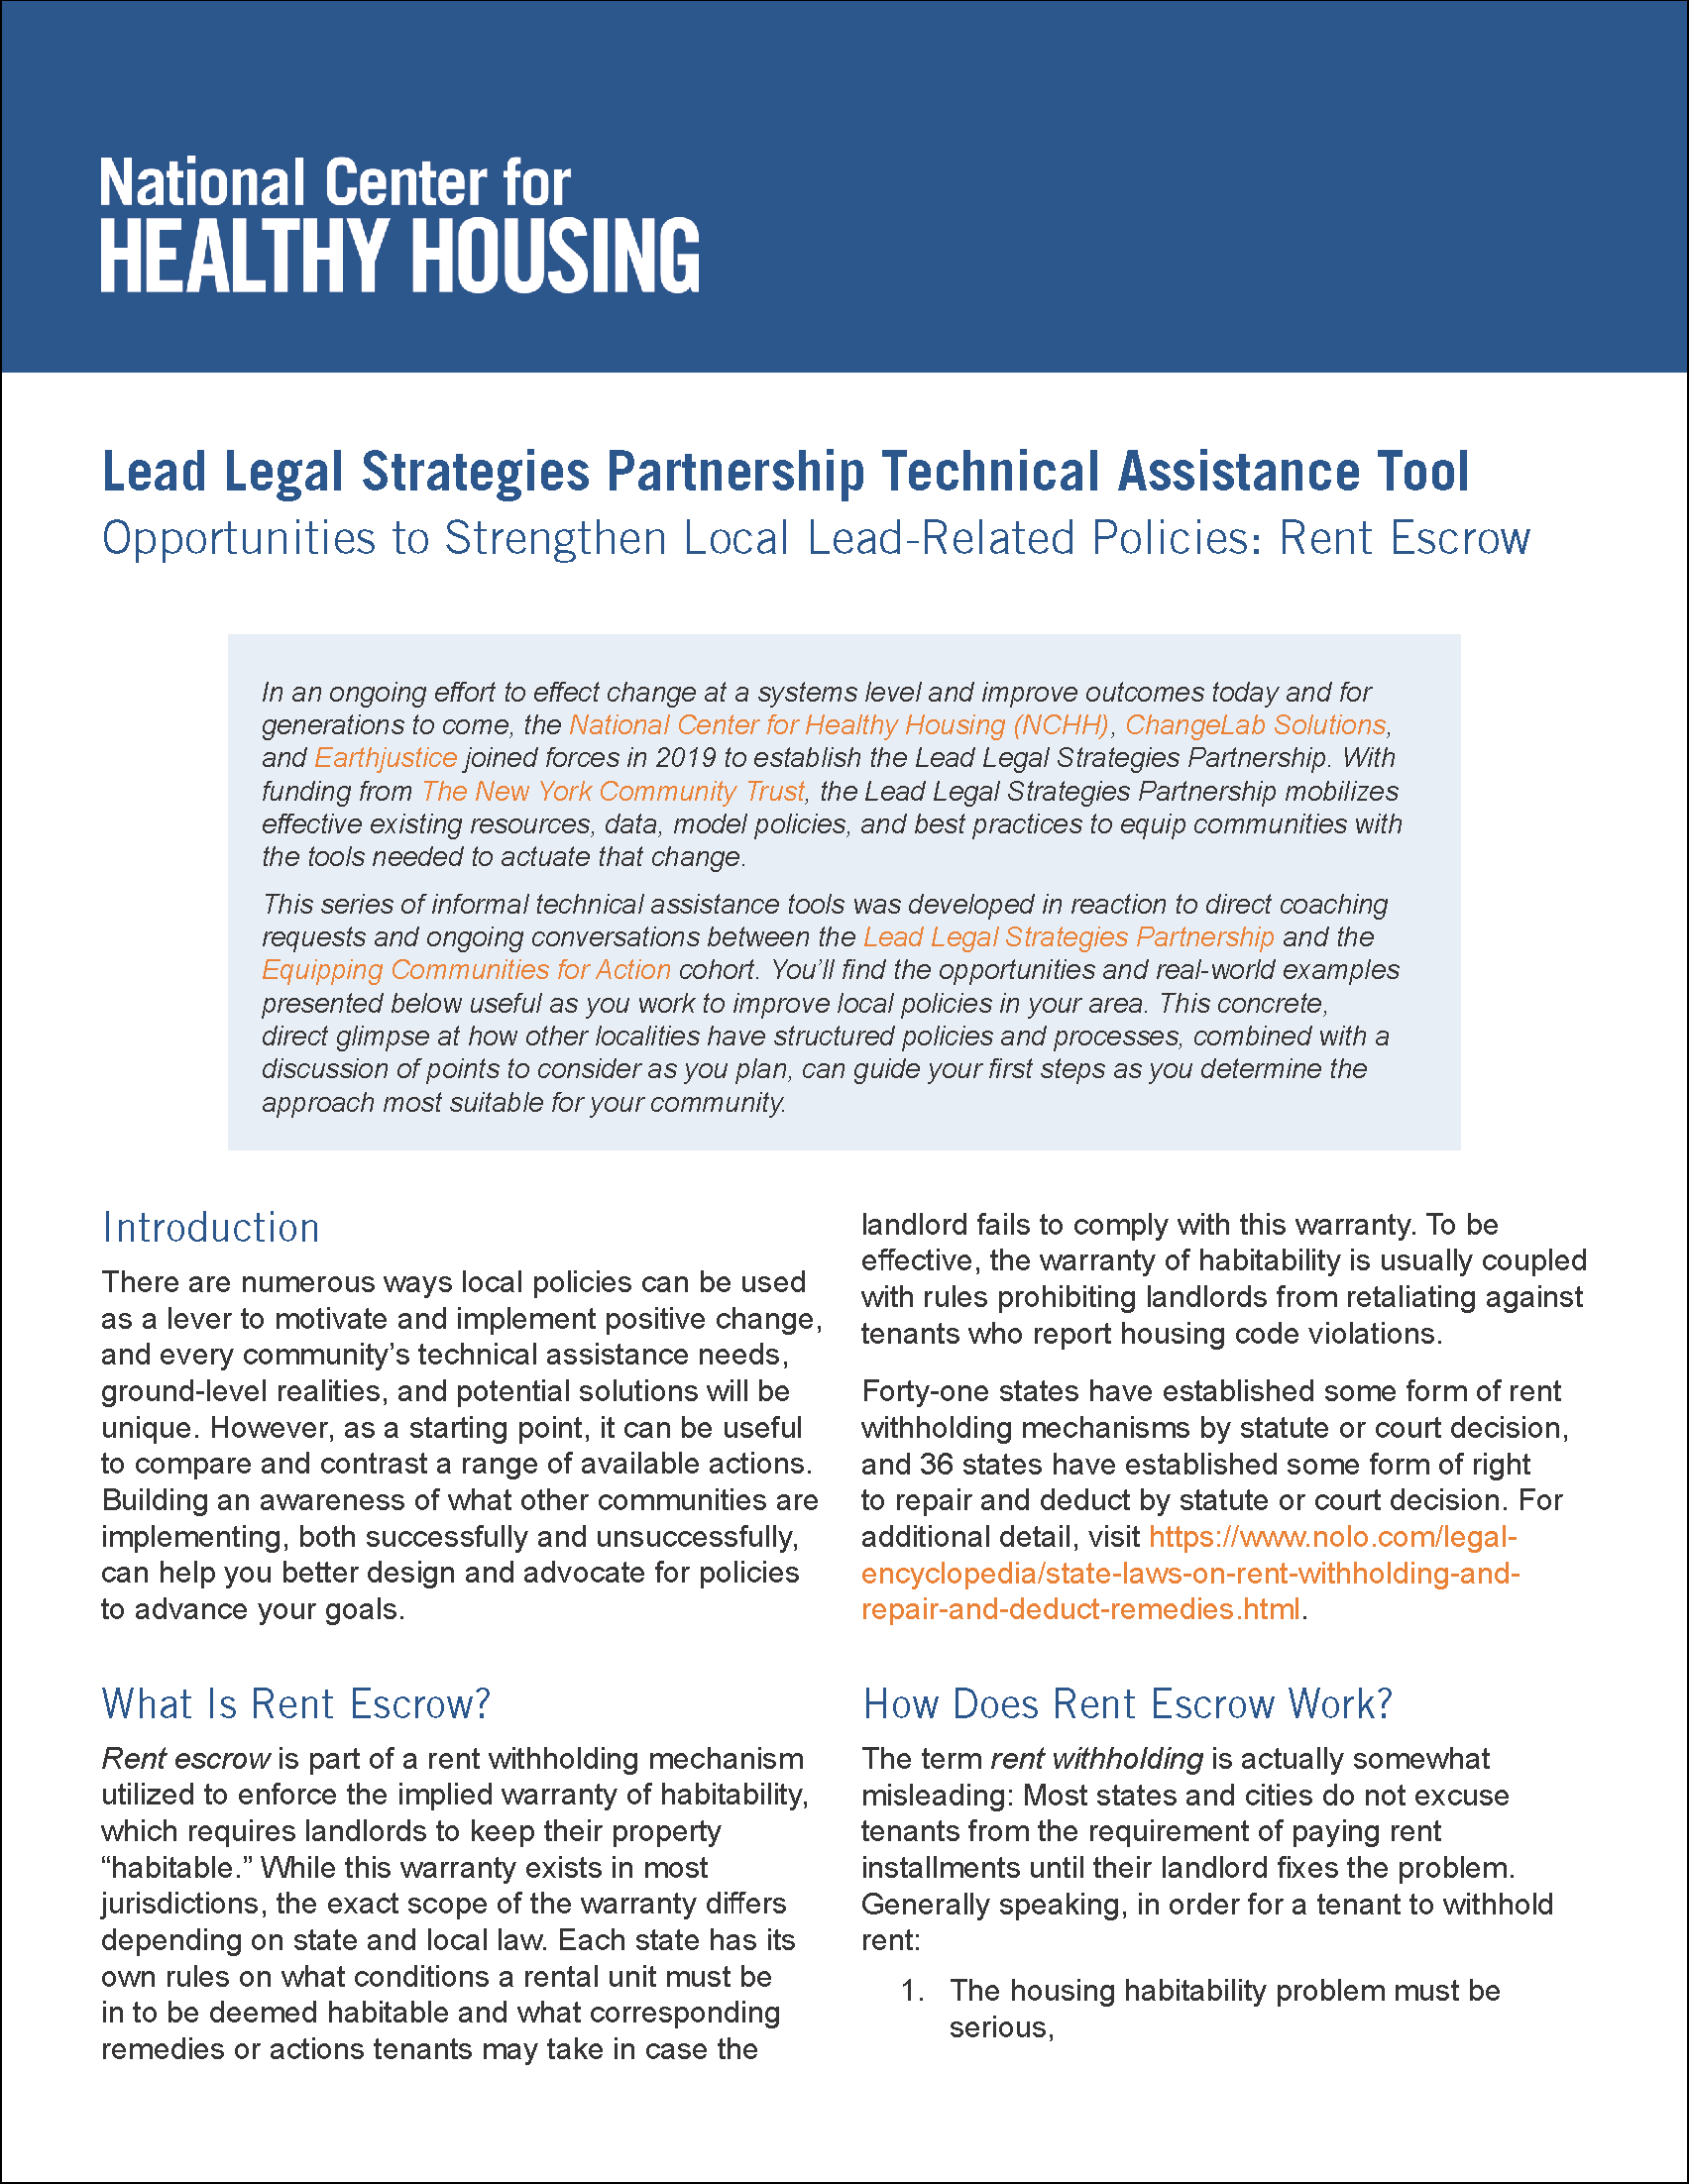 Opportunities to Strengthen Local Lead-Related Policies: Rent Escrow